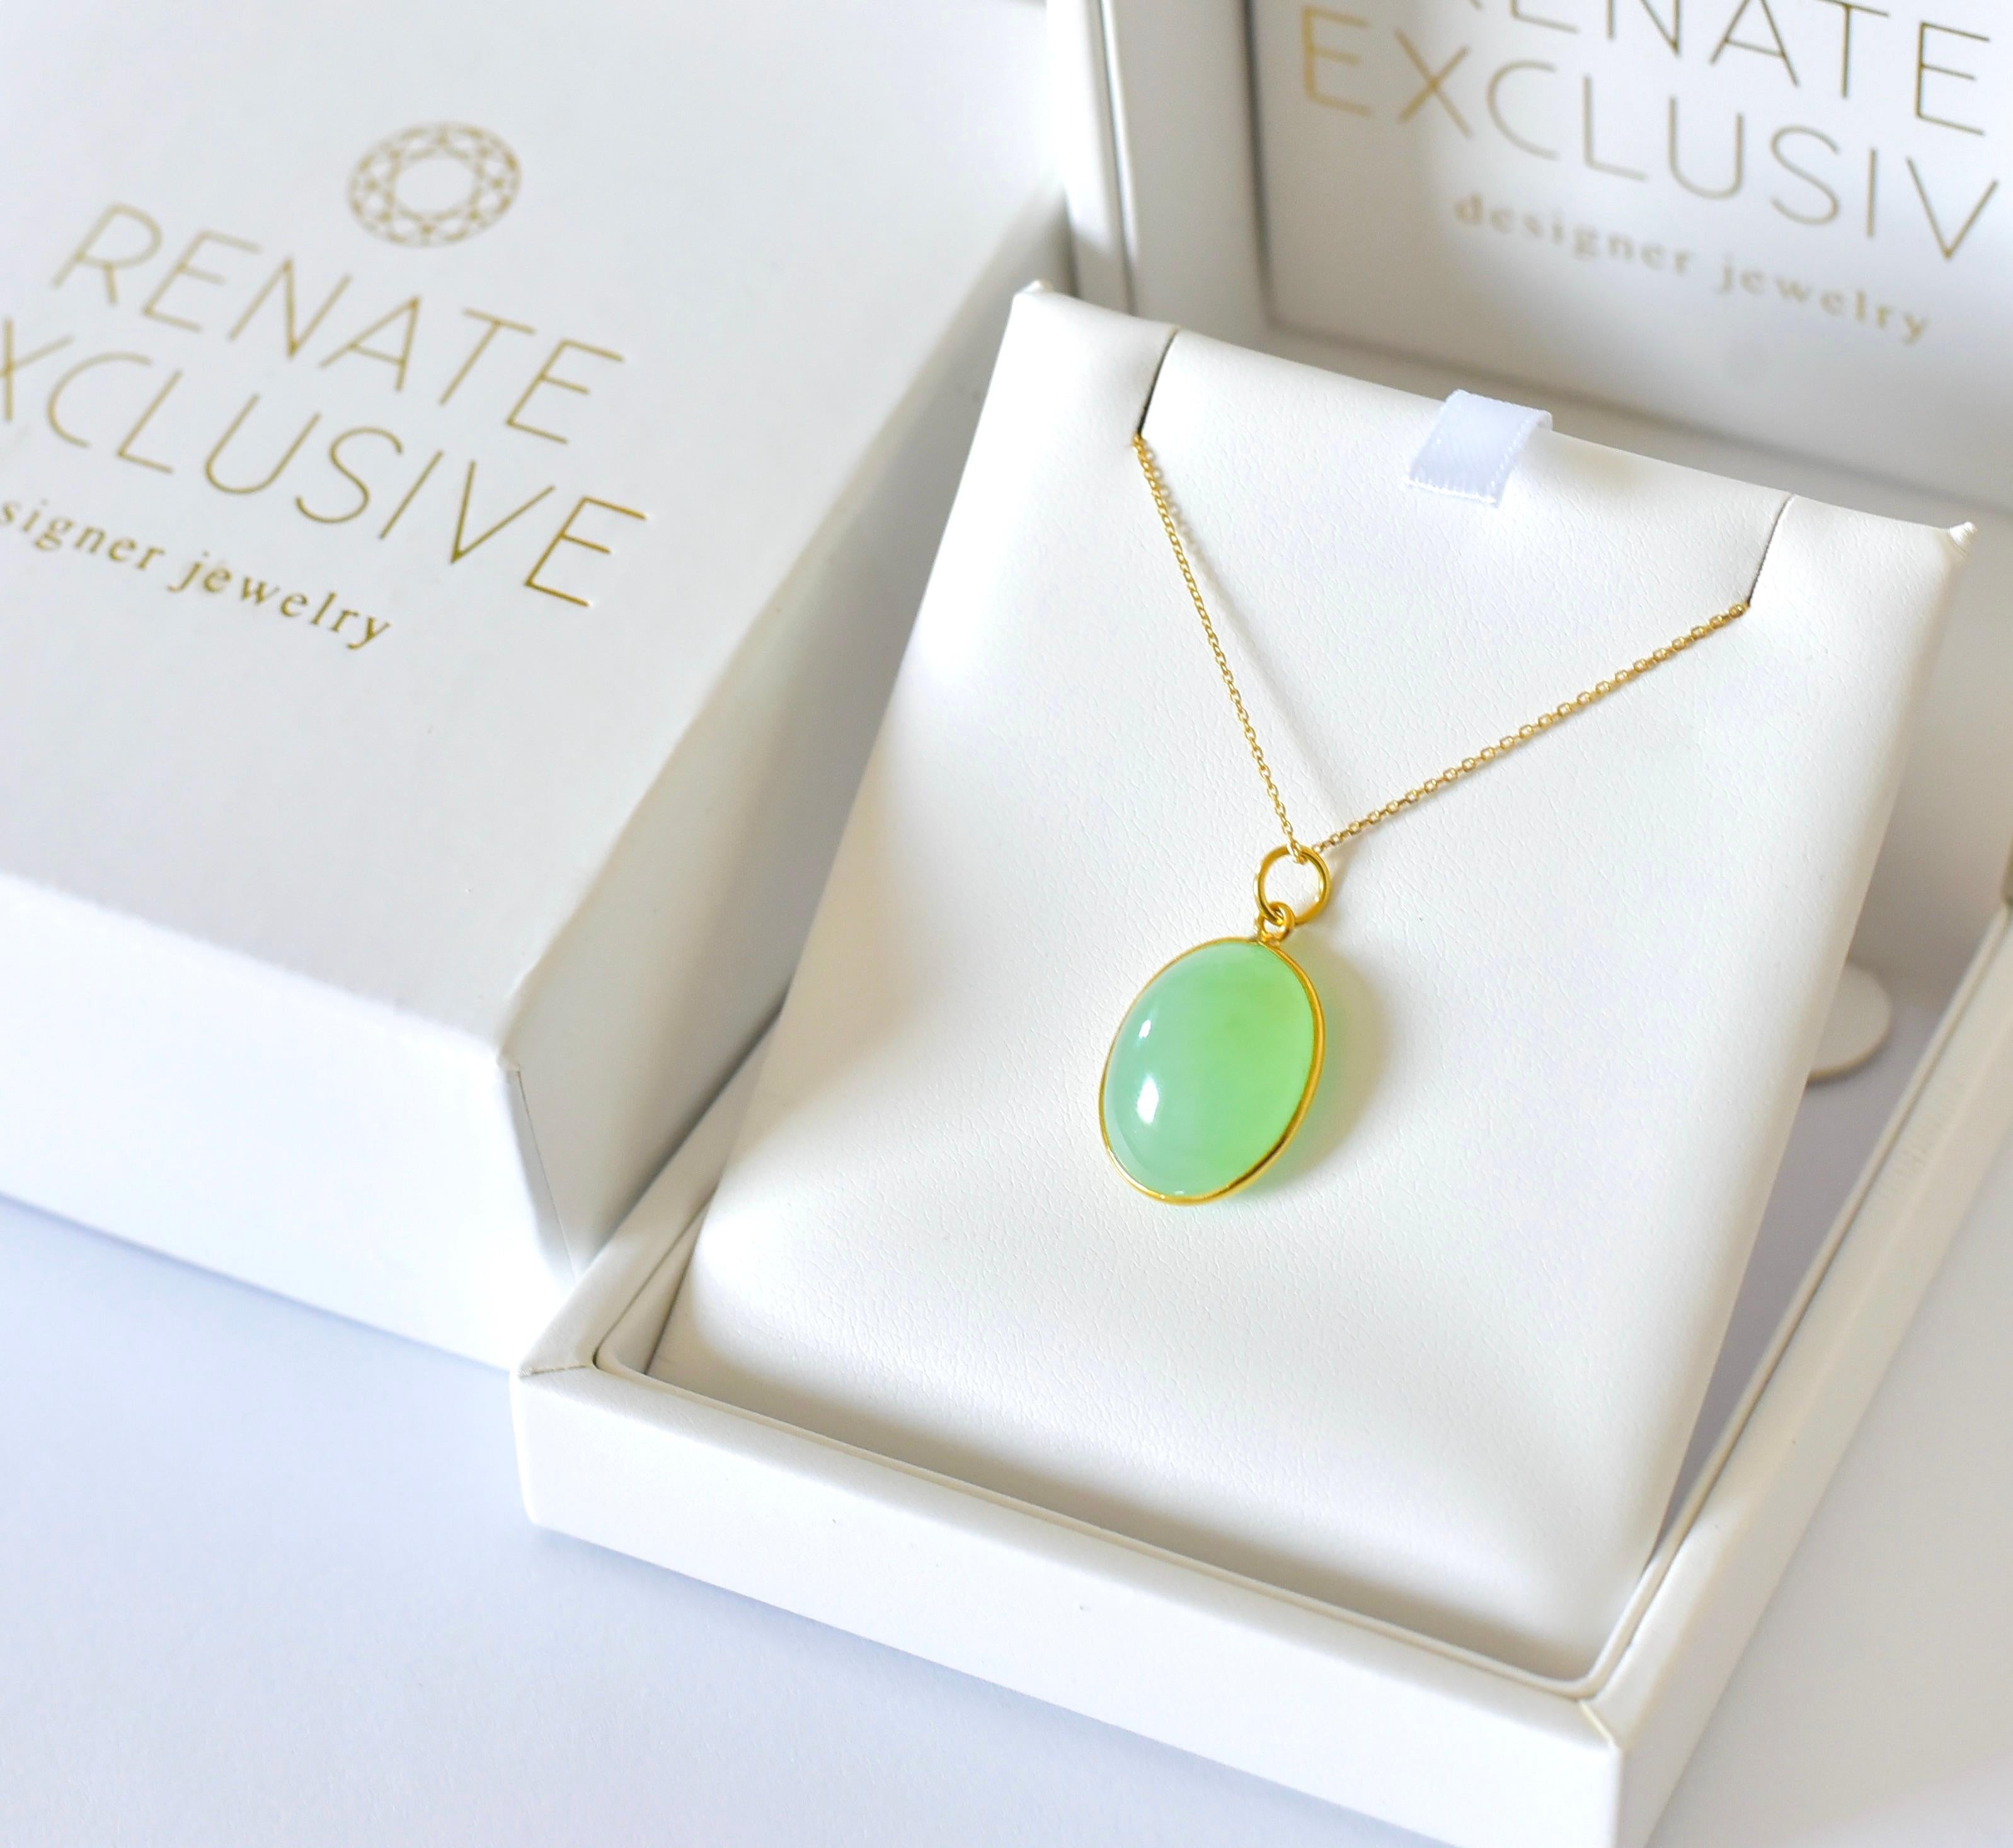 Oval Cut Australian Chrysoprase Oval Pendant Necklace in 18K Solid Yellow Gold For Sale